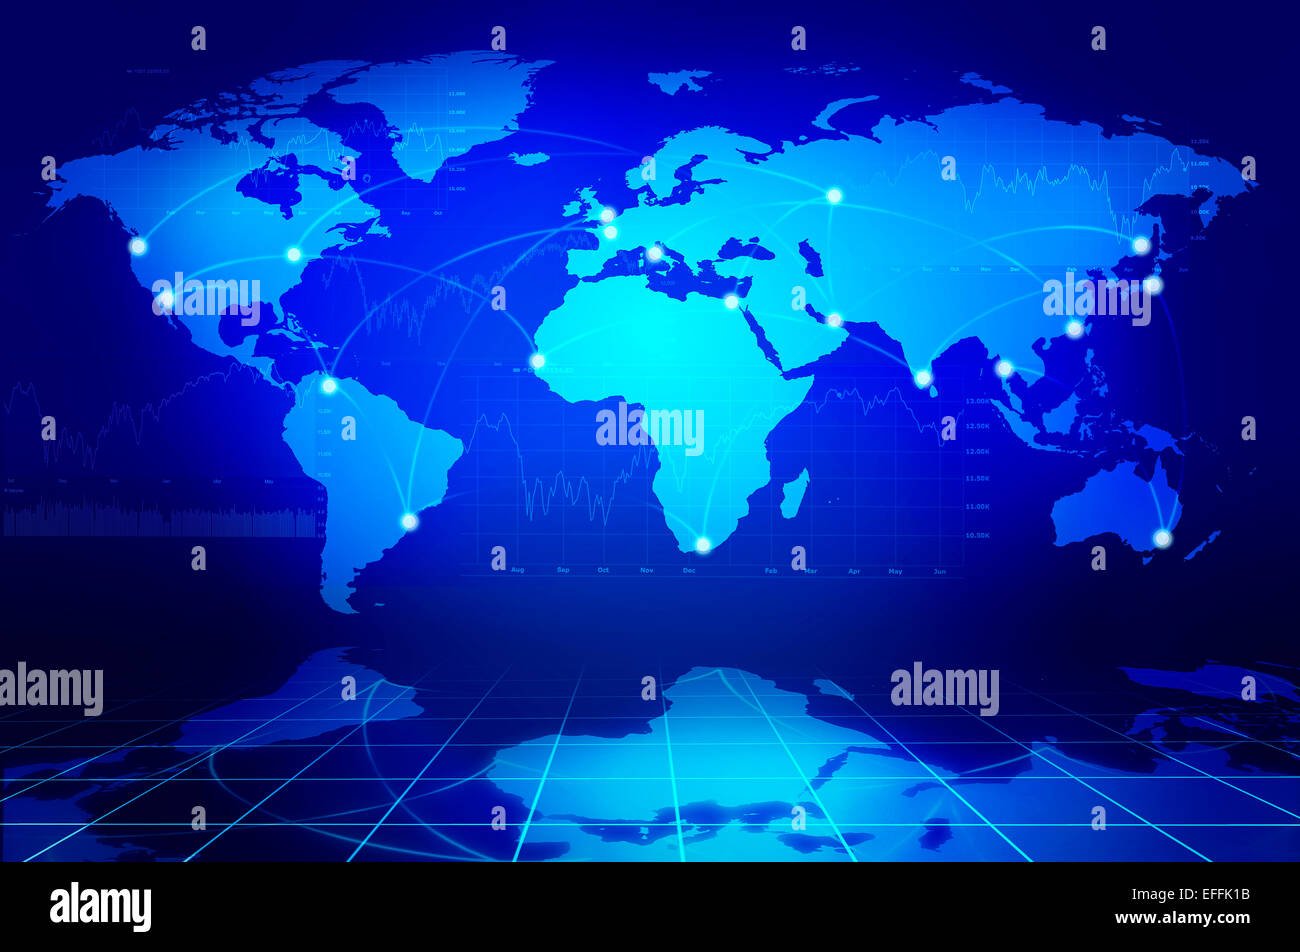 Global network concept Stock Photo